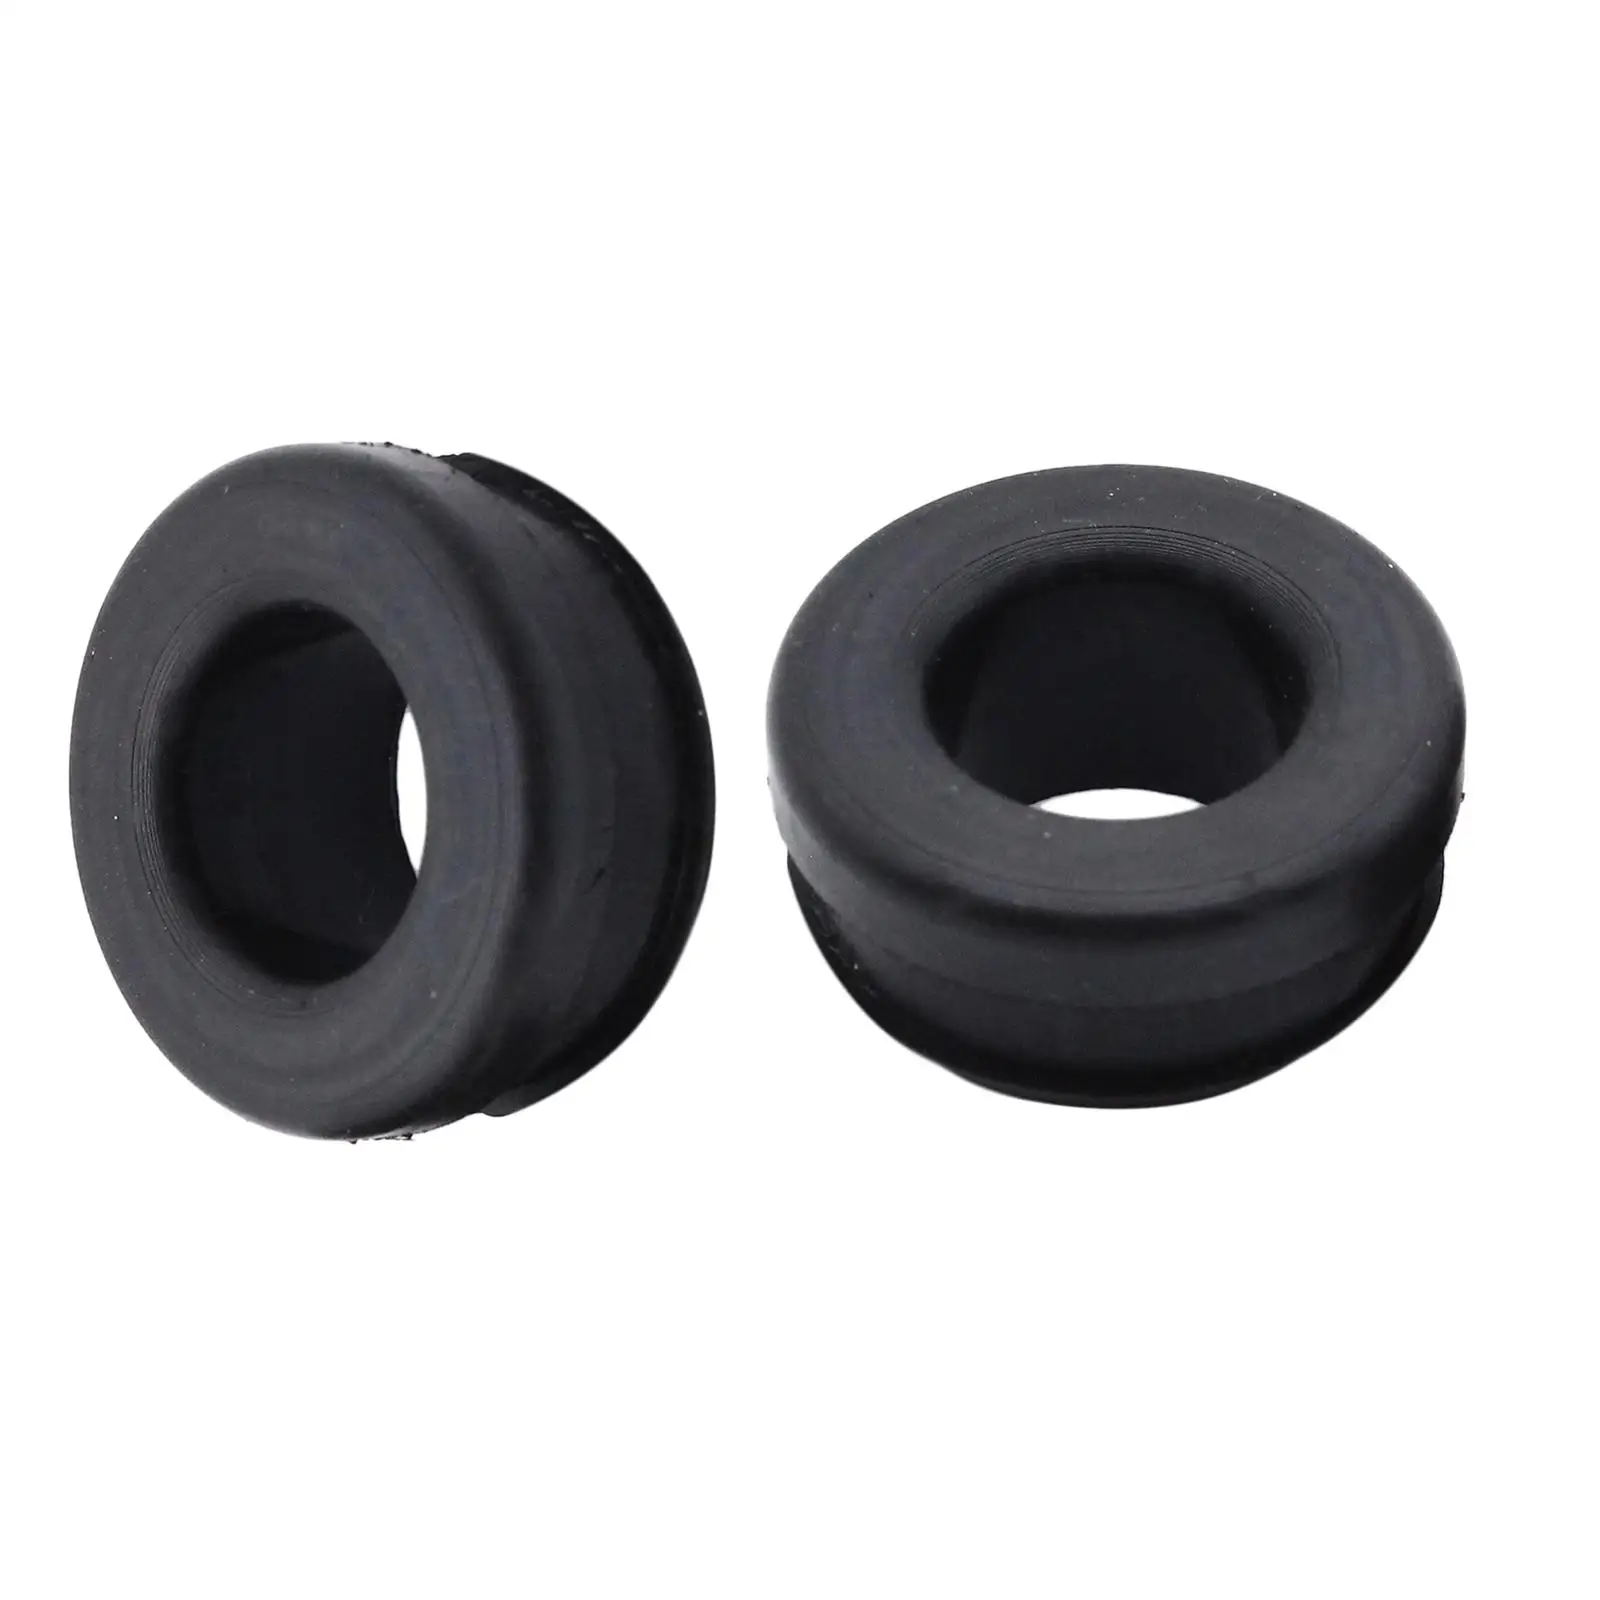 2x Rubber Pcv Breather Grommets Car Supplies for Sbc Sbf 350 A96